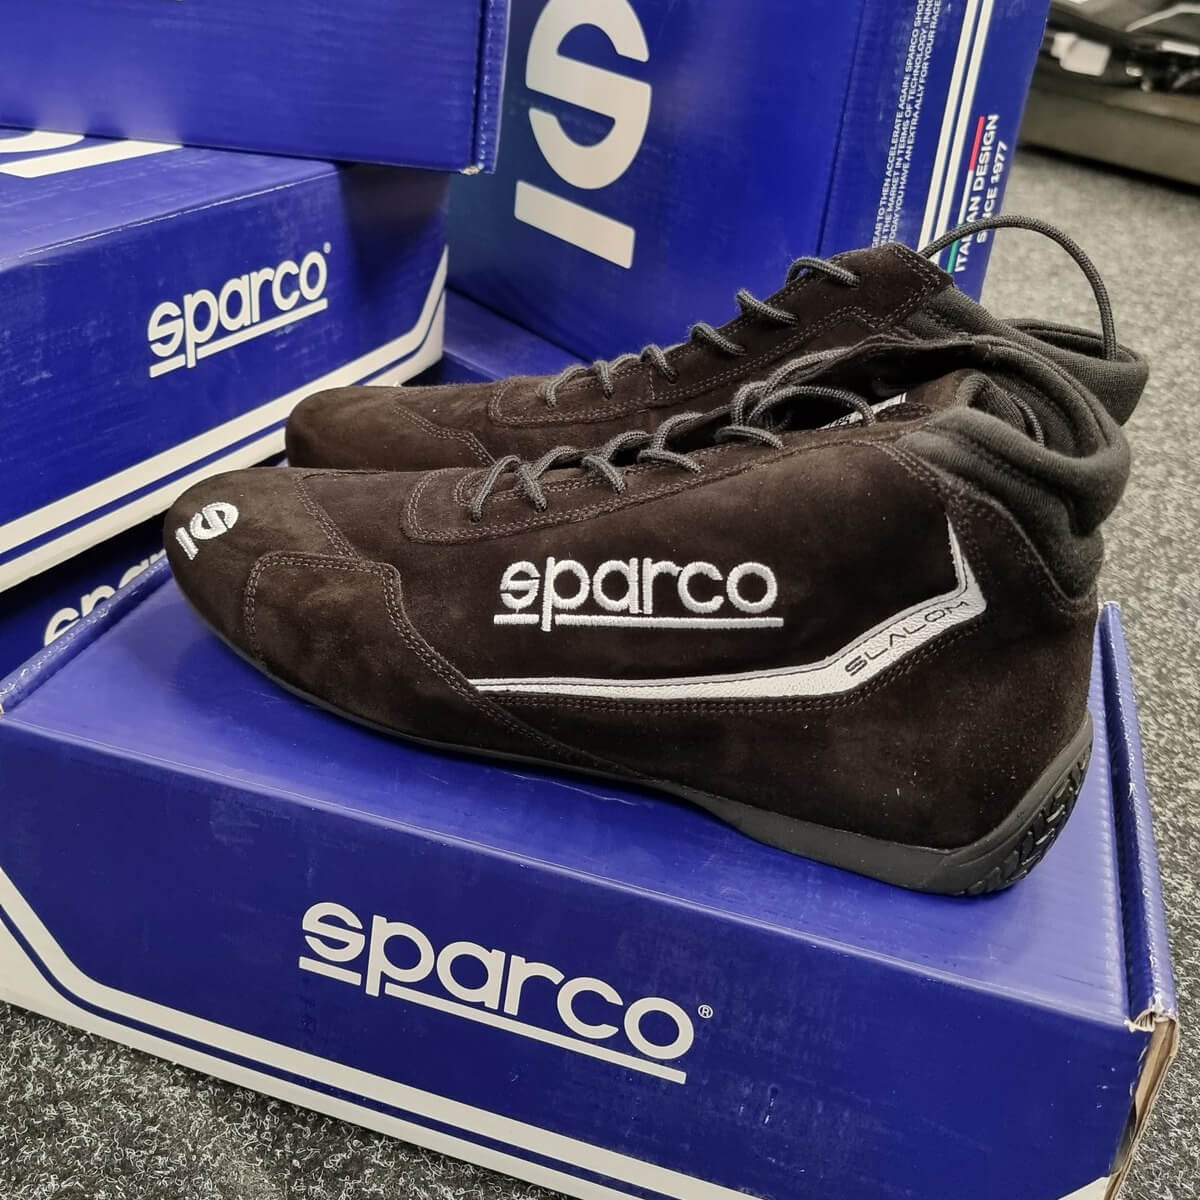 Chaussures Sparco RB-3.1